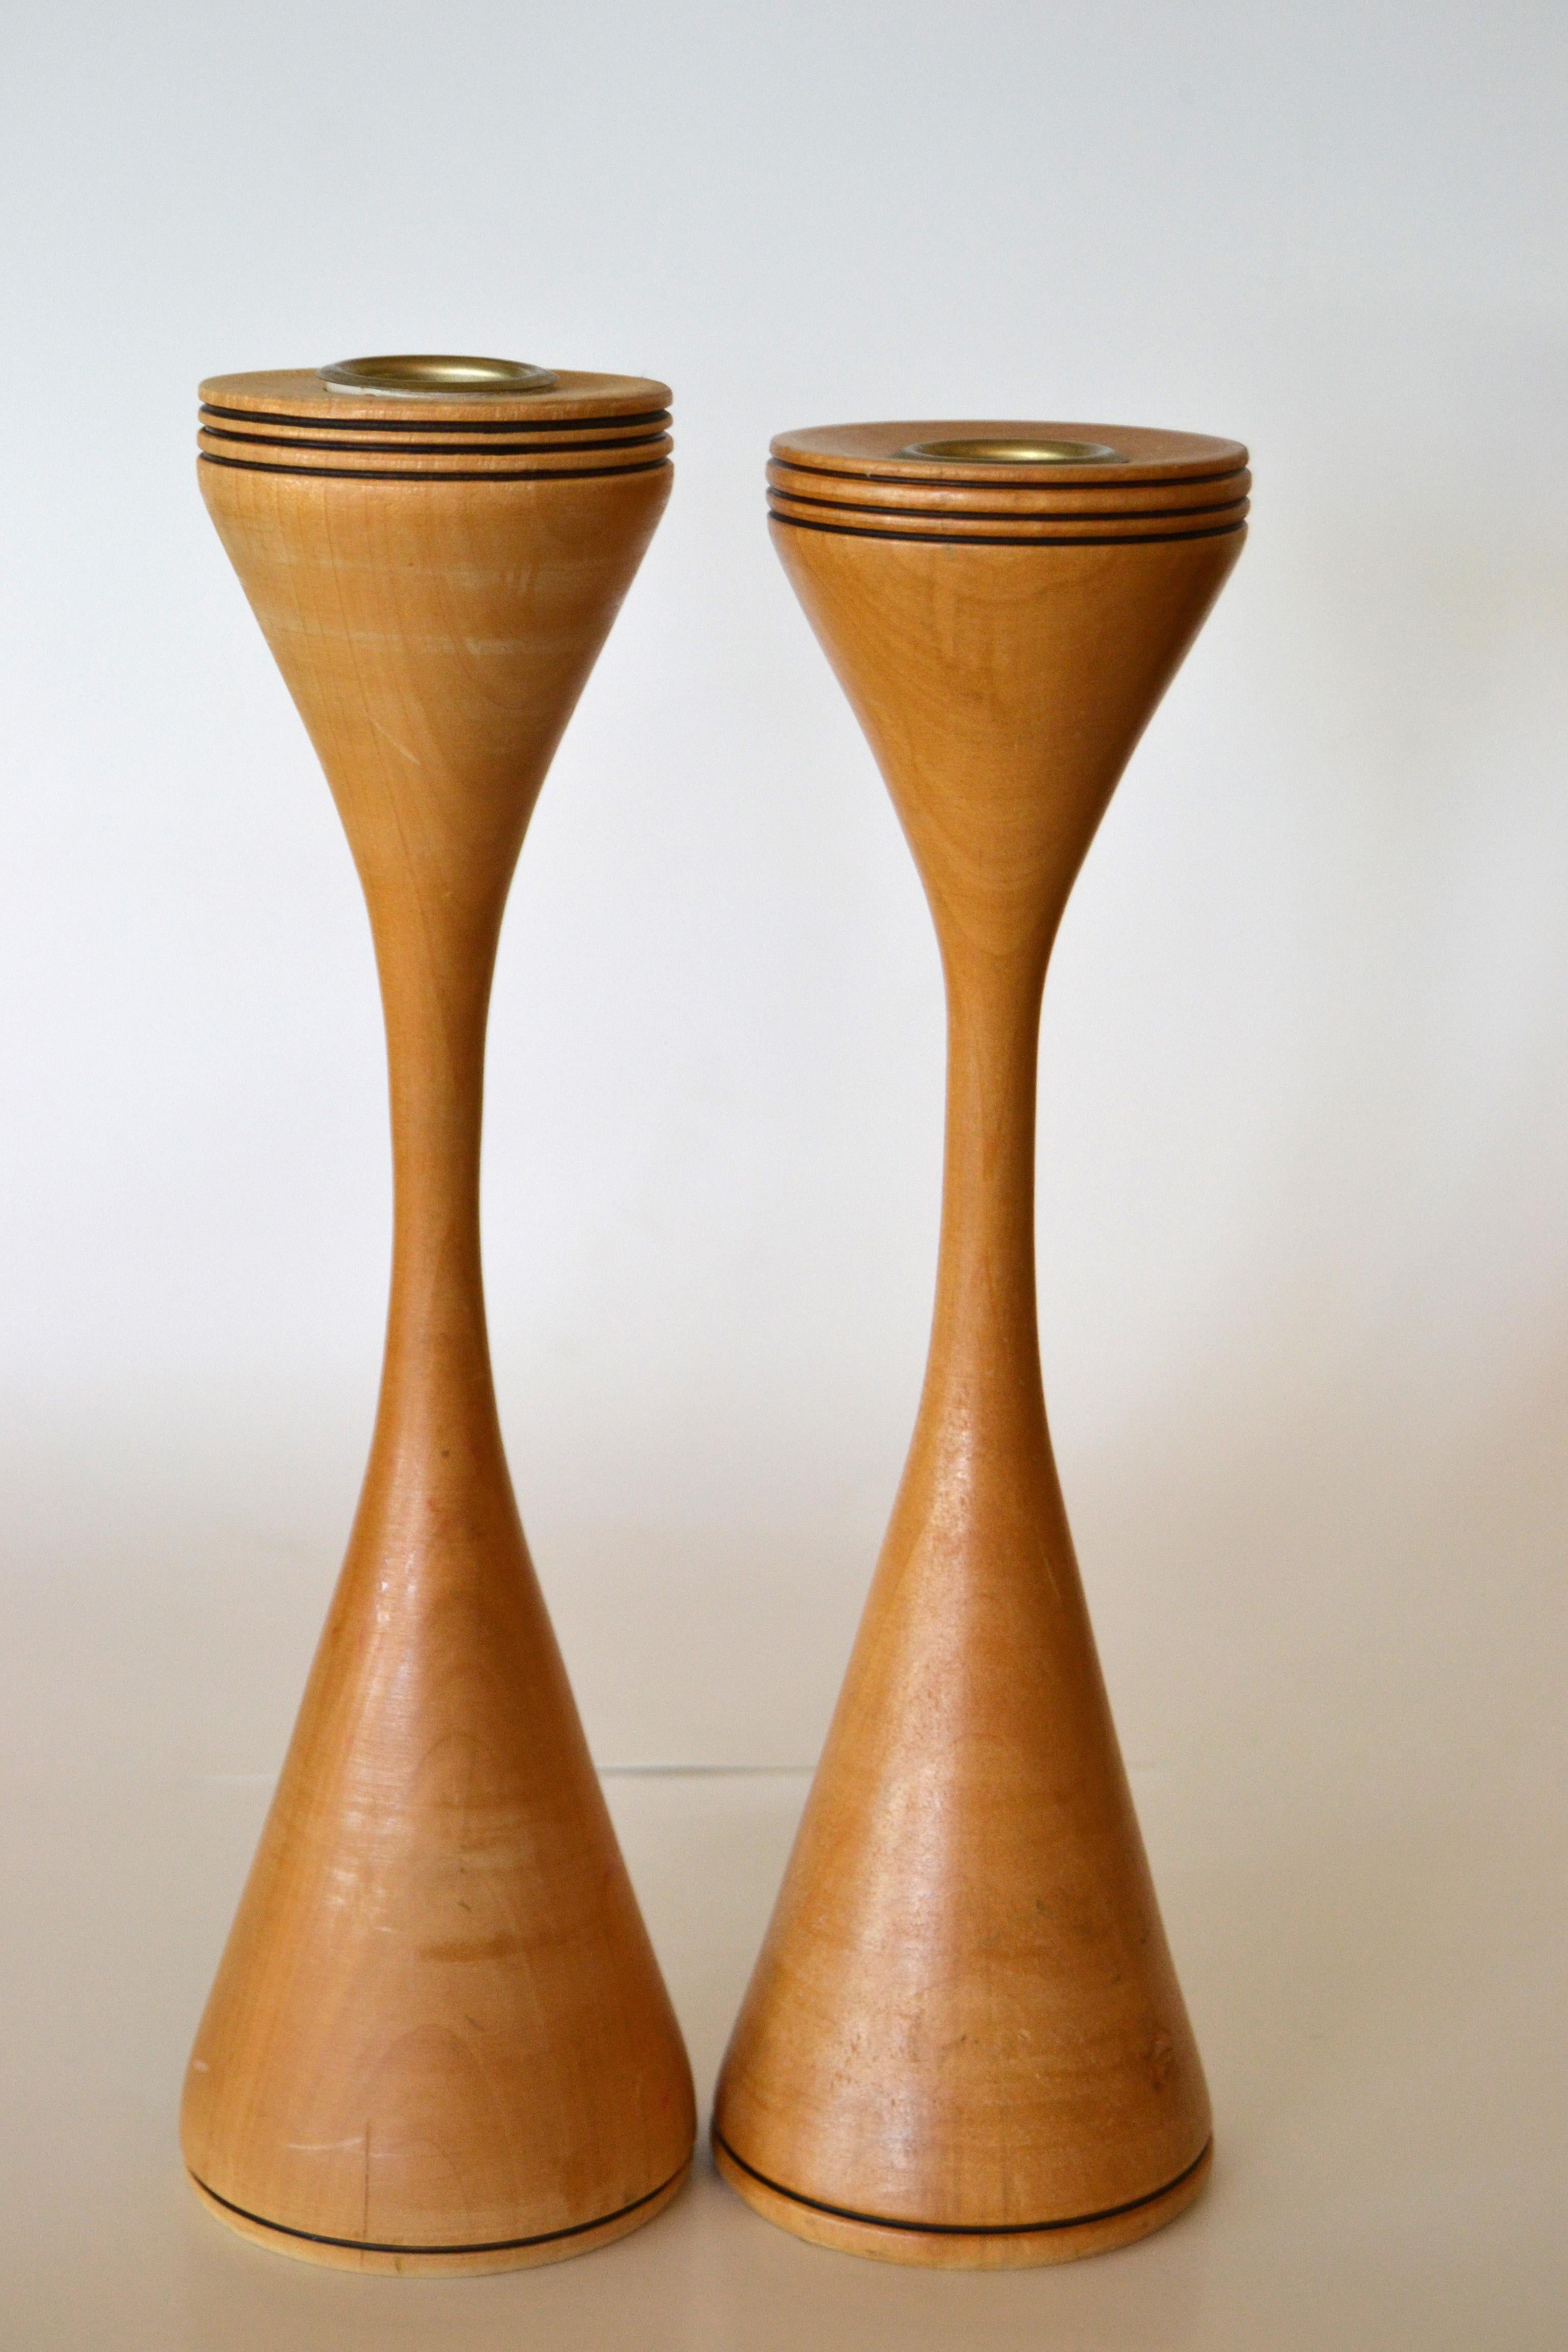 A pair of signed Scandinavian Modern handcrafted turned wood and brass candleholders.
Branded signature by Artist underneath.